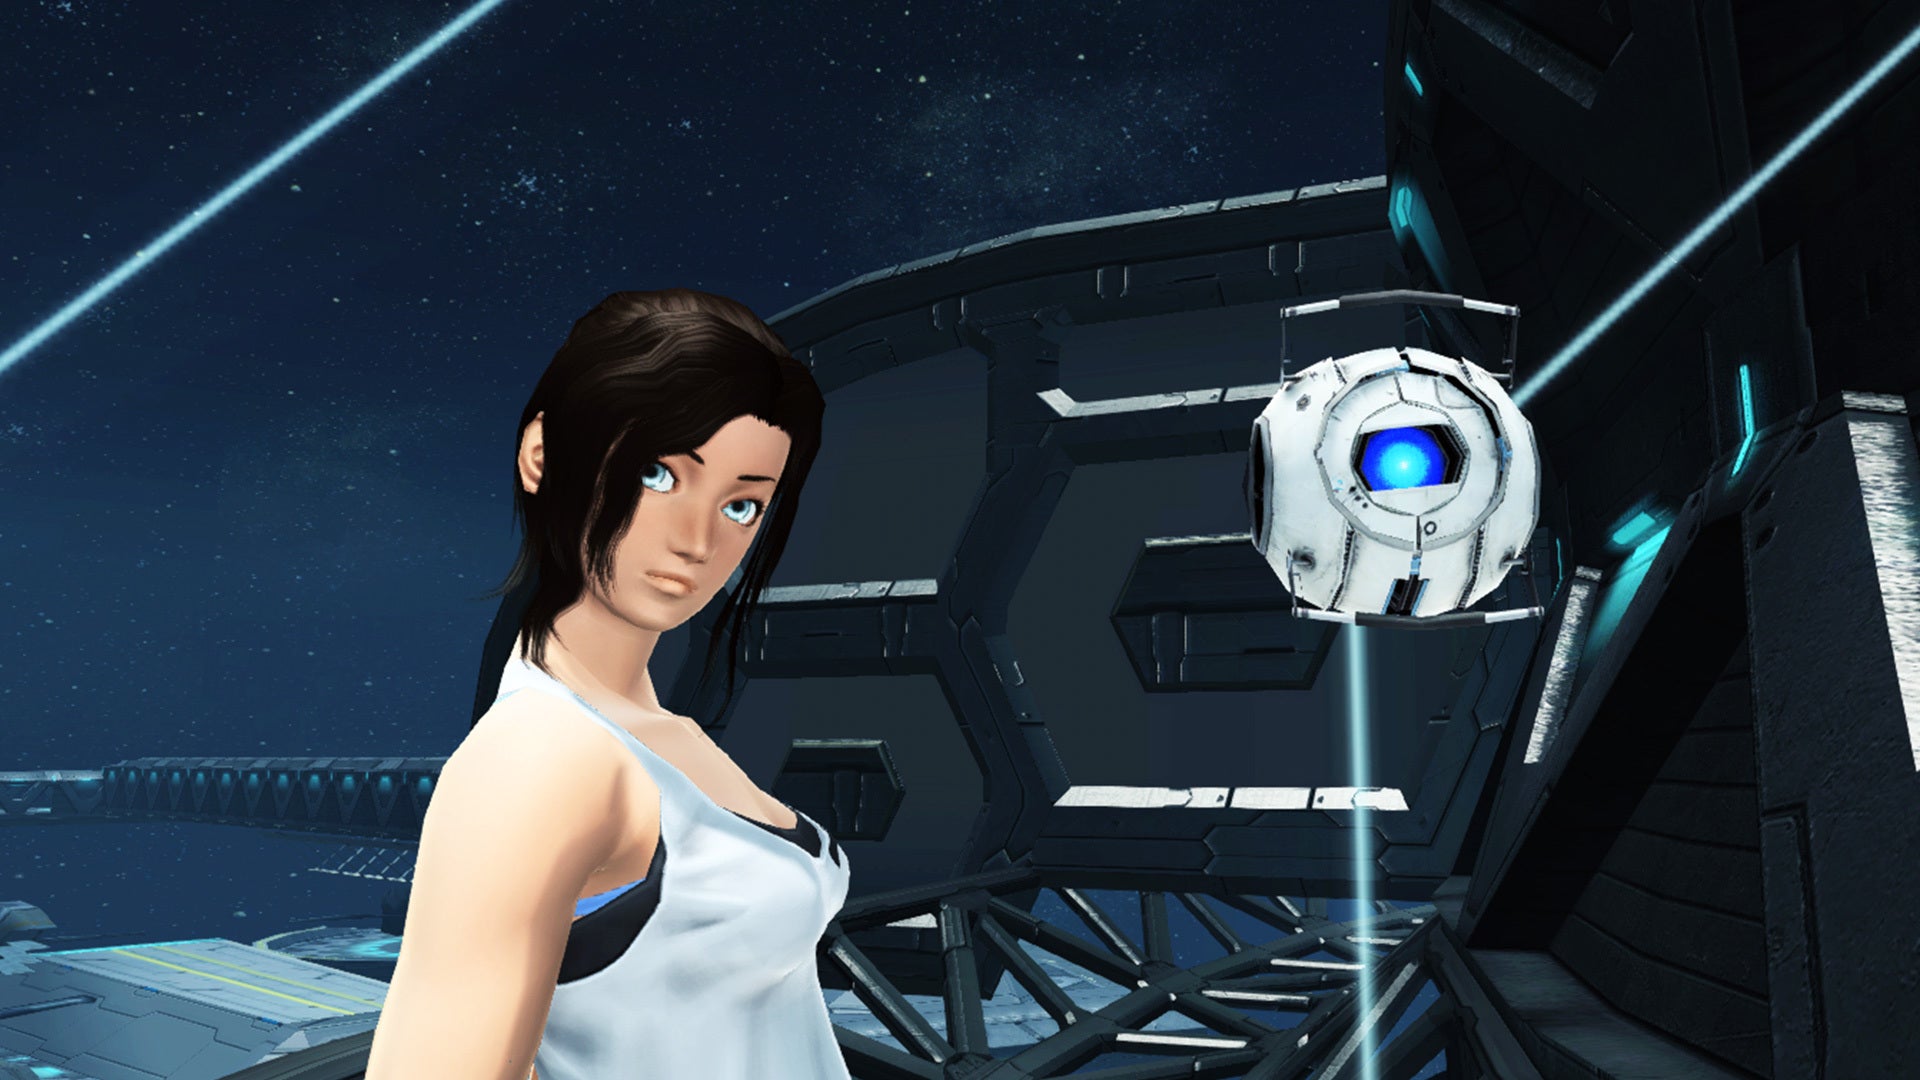 Image for Phantasy Star Online 2 is coming to Steam next week